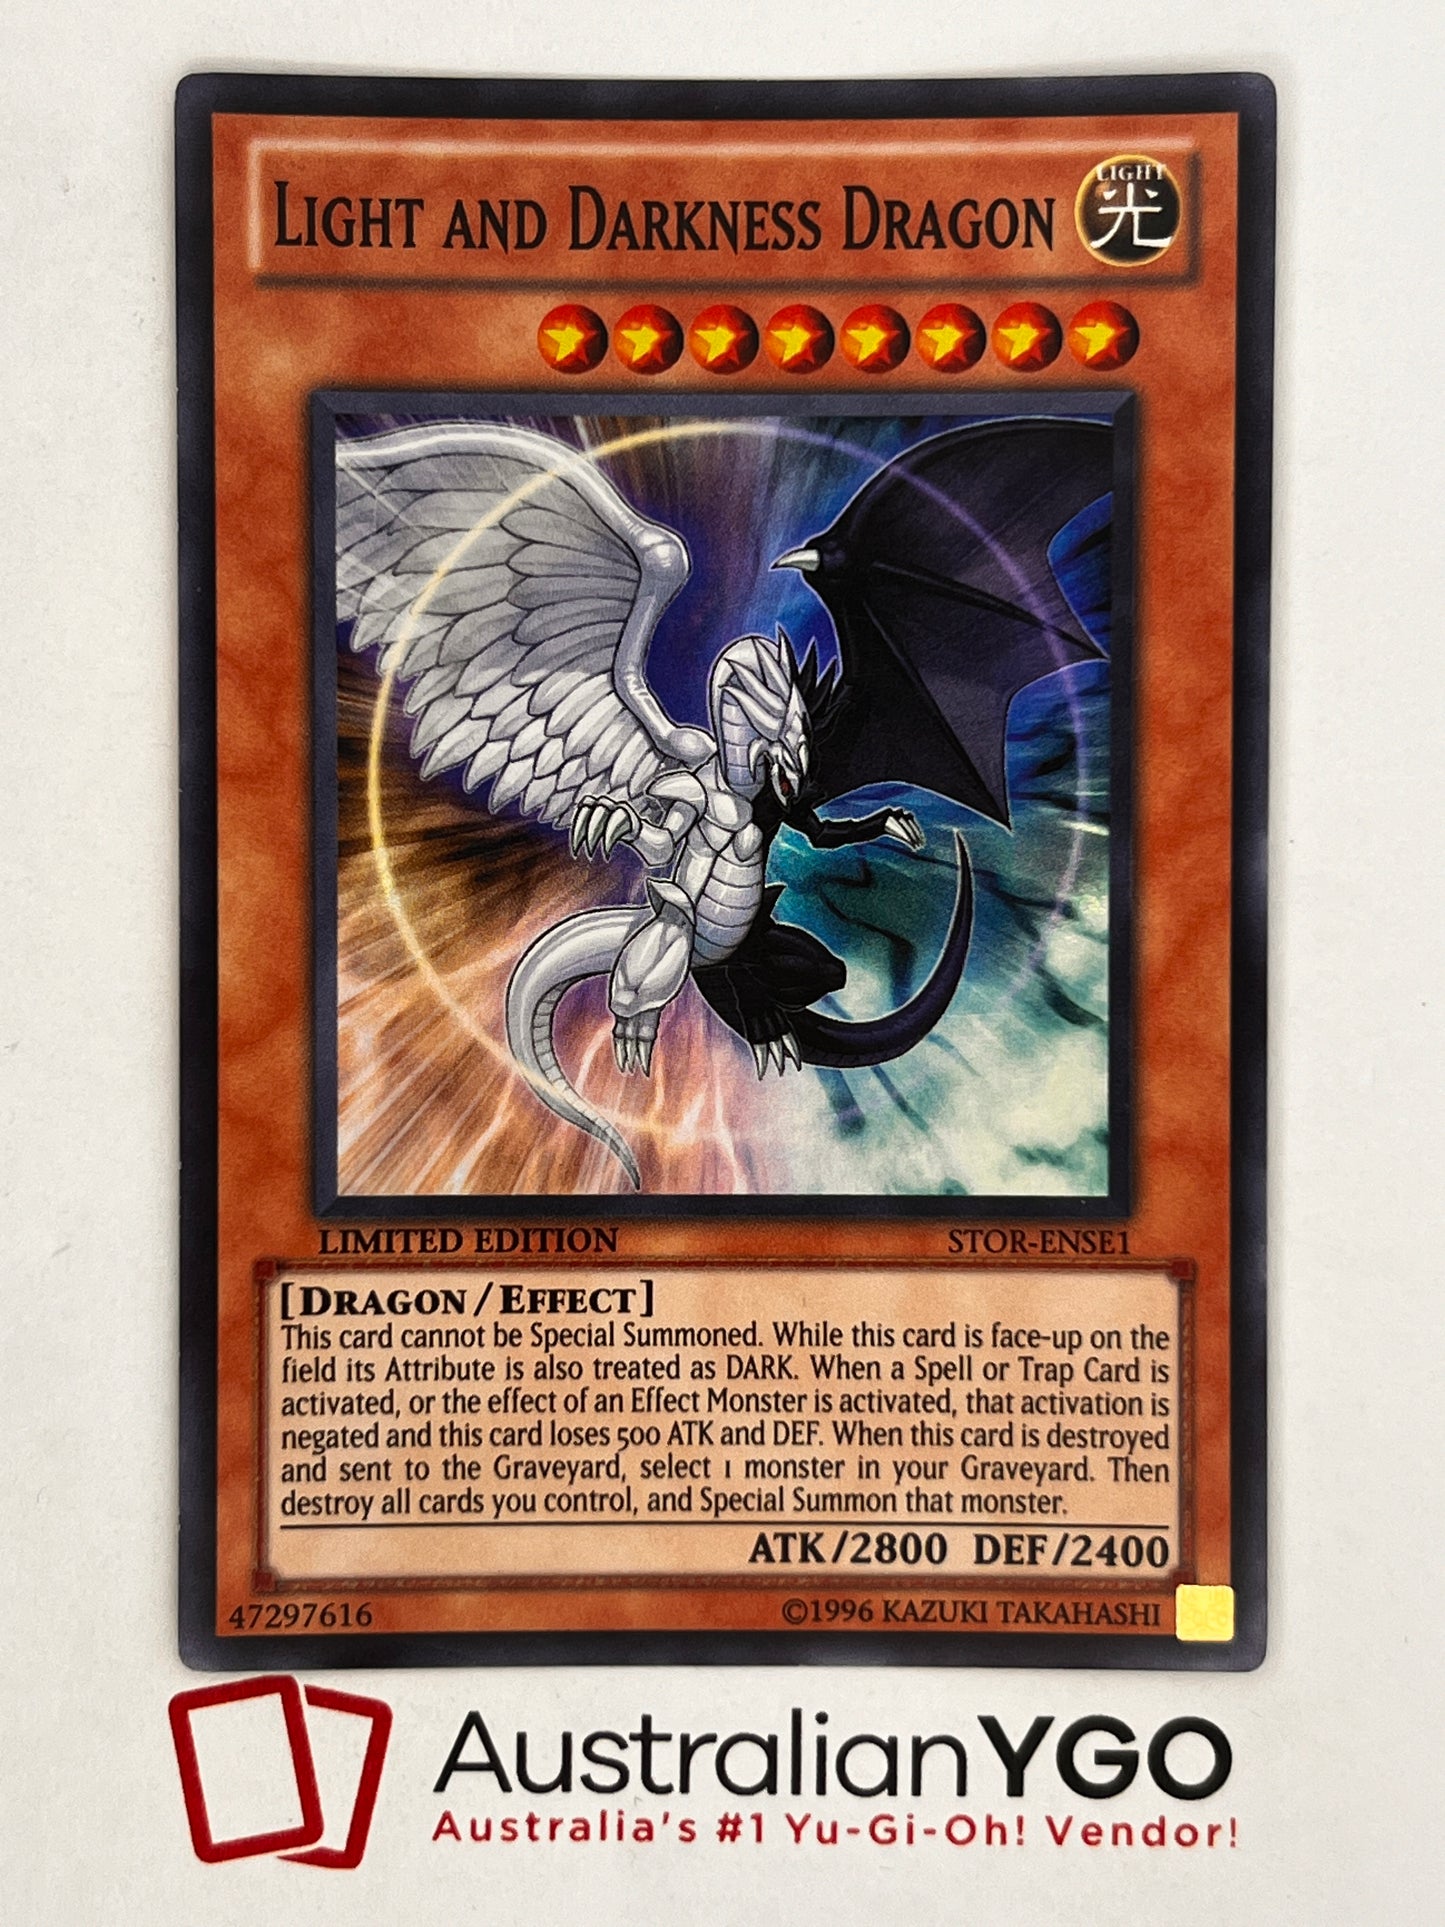 LIGHT AND DARKNESS DRAGON (American) STOR-ENSE1